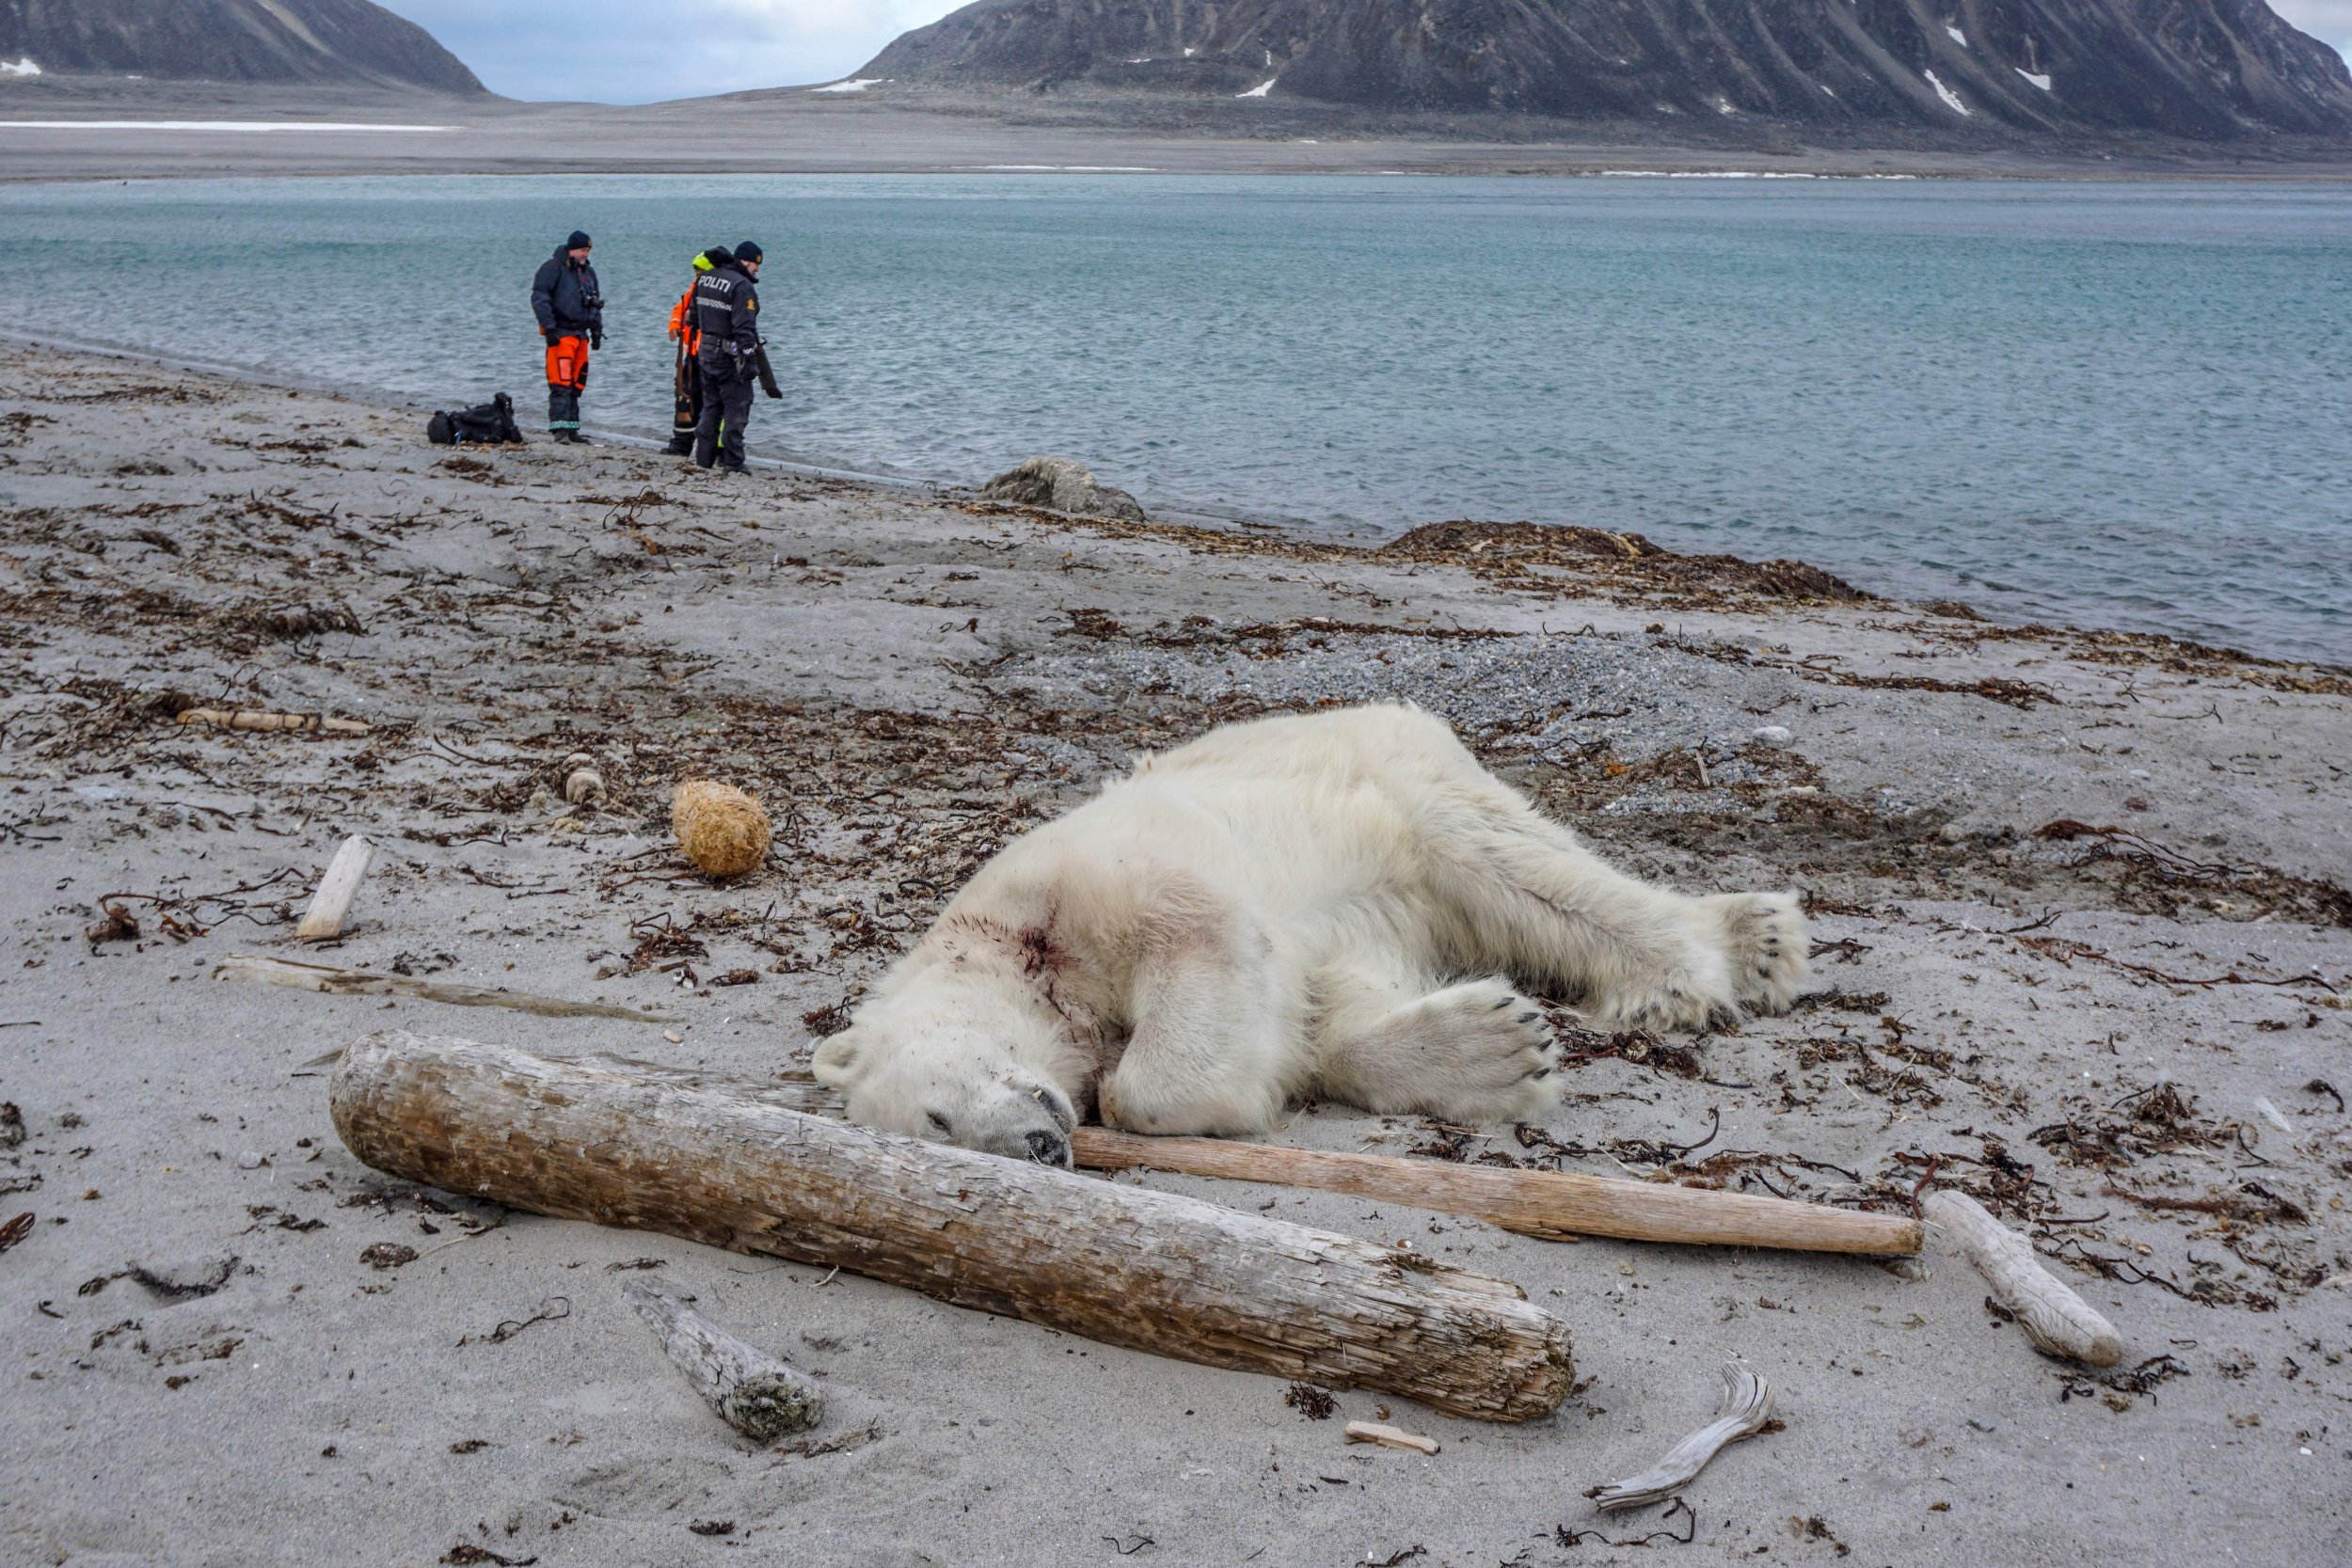 Authorities defend cruise line's decision to shoot polar bear